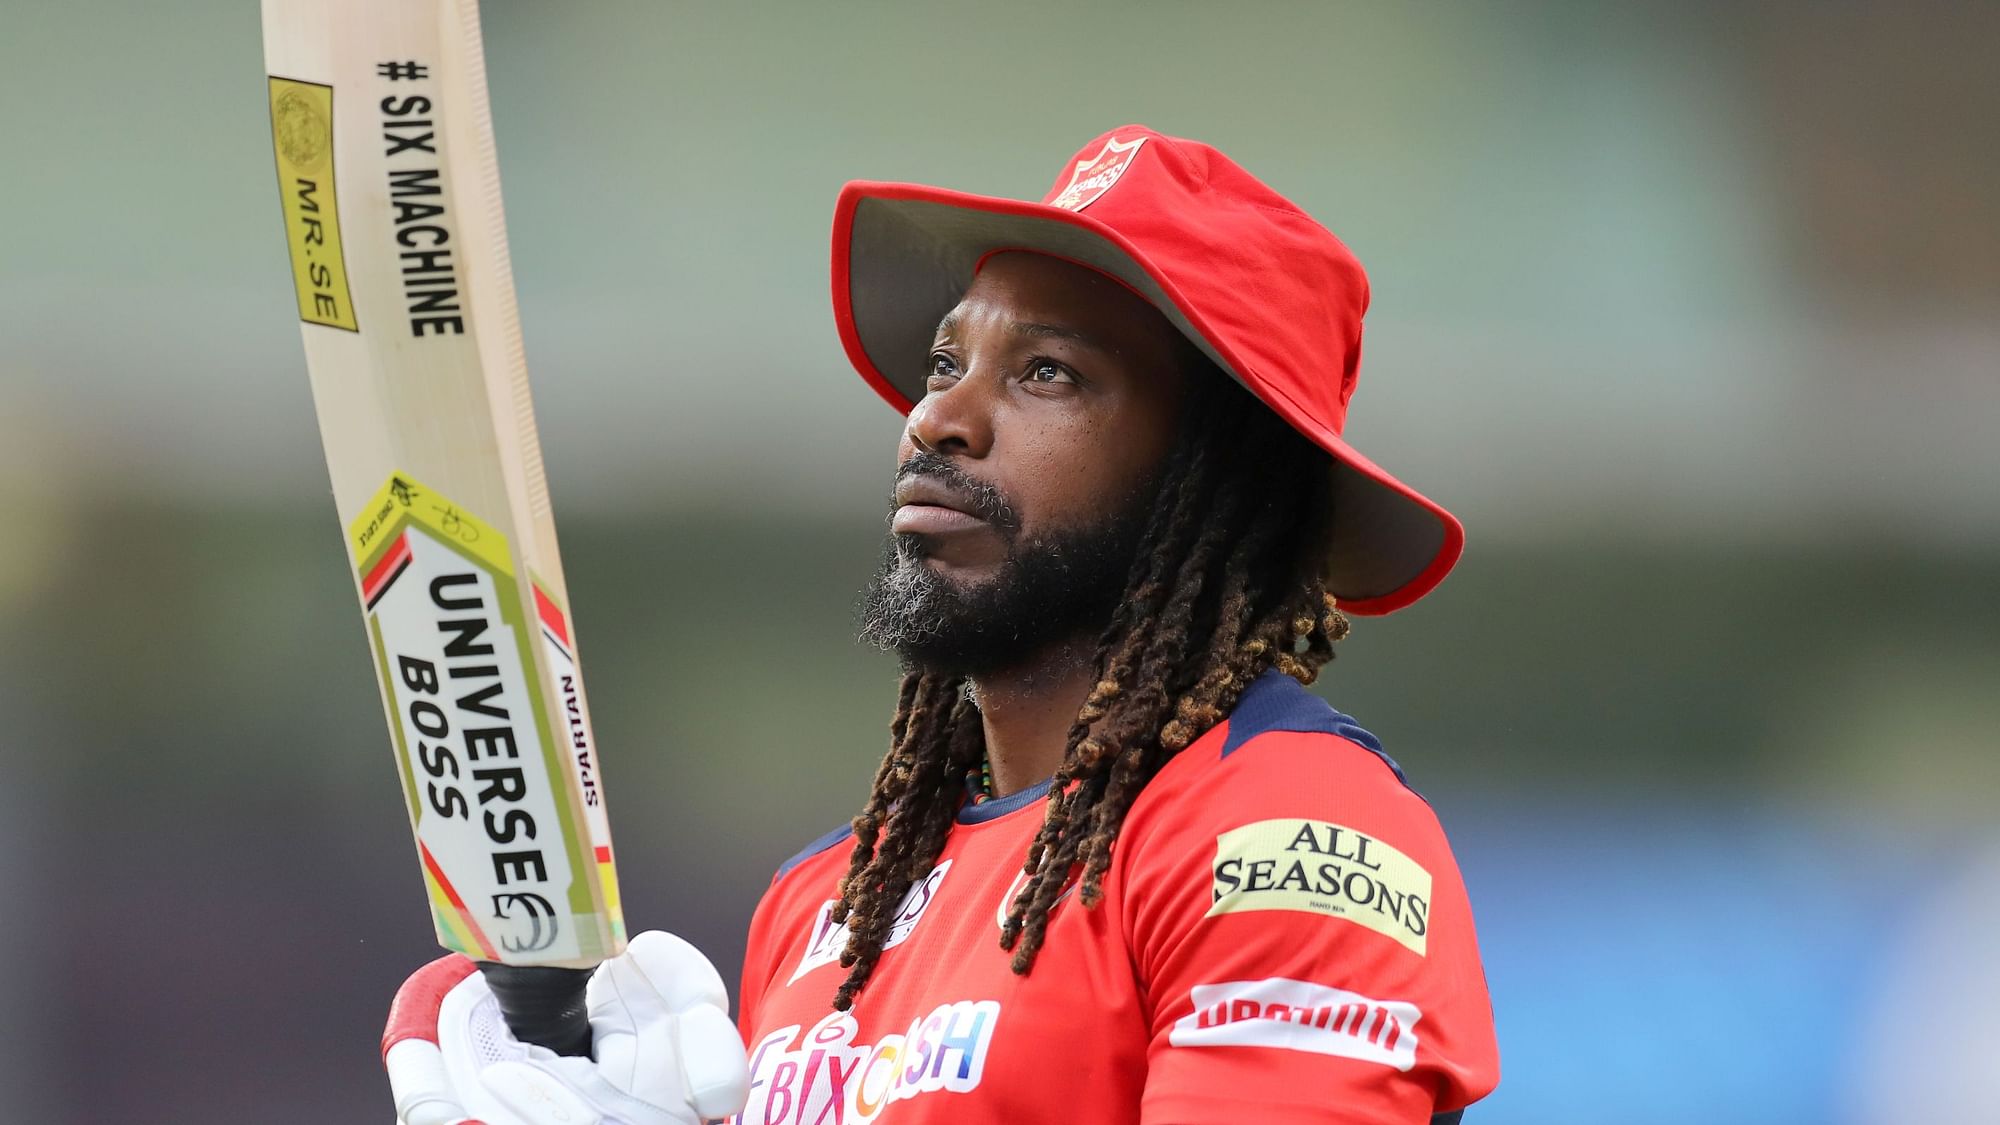 Chris Gayle becomes the first player to hit 350 sixes in IPL history.